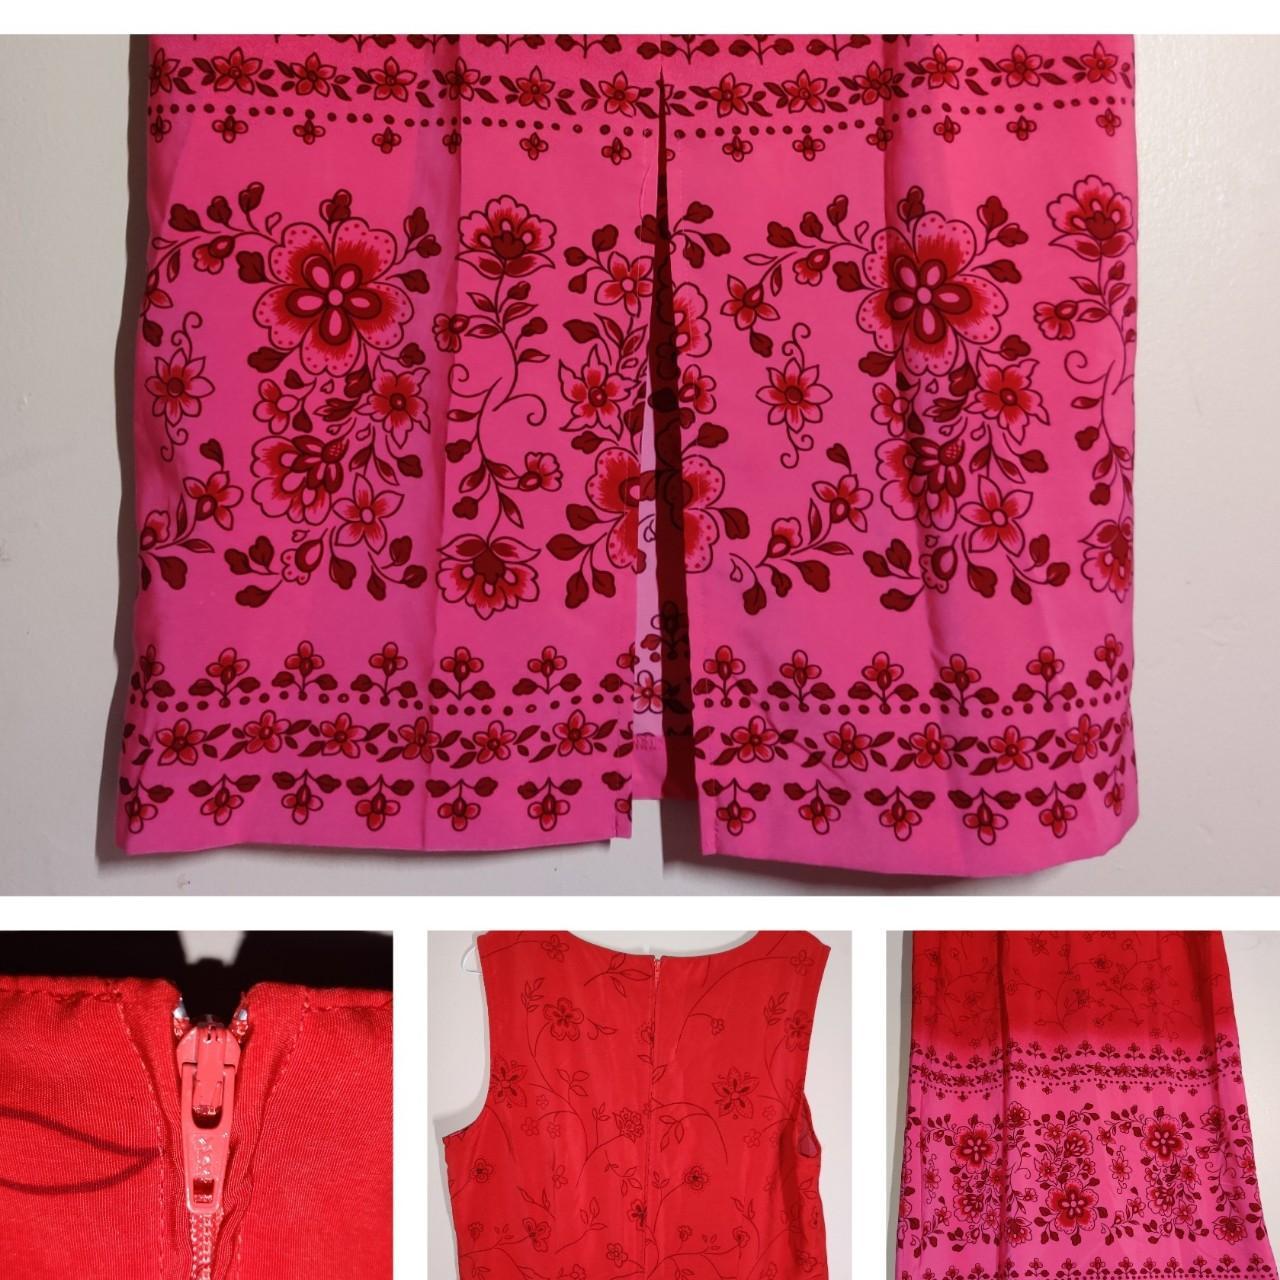 Women's Red and Pink Dress (4)